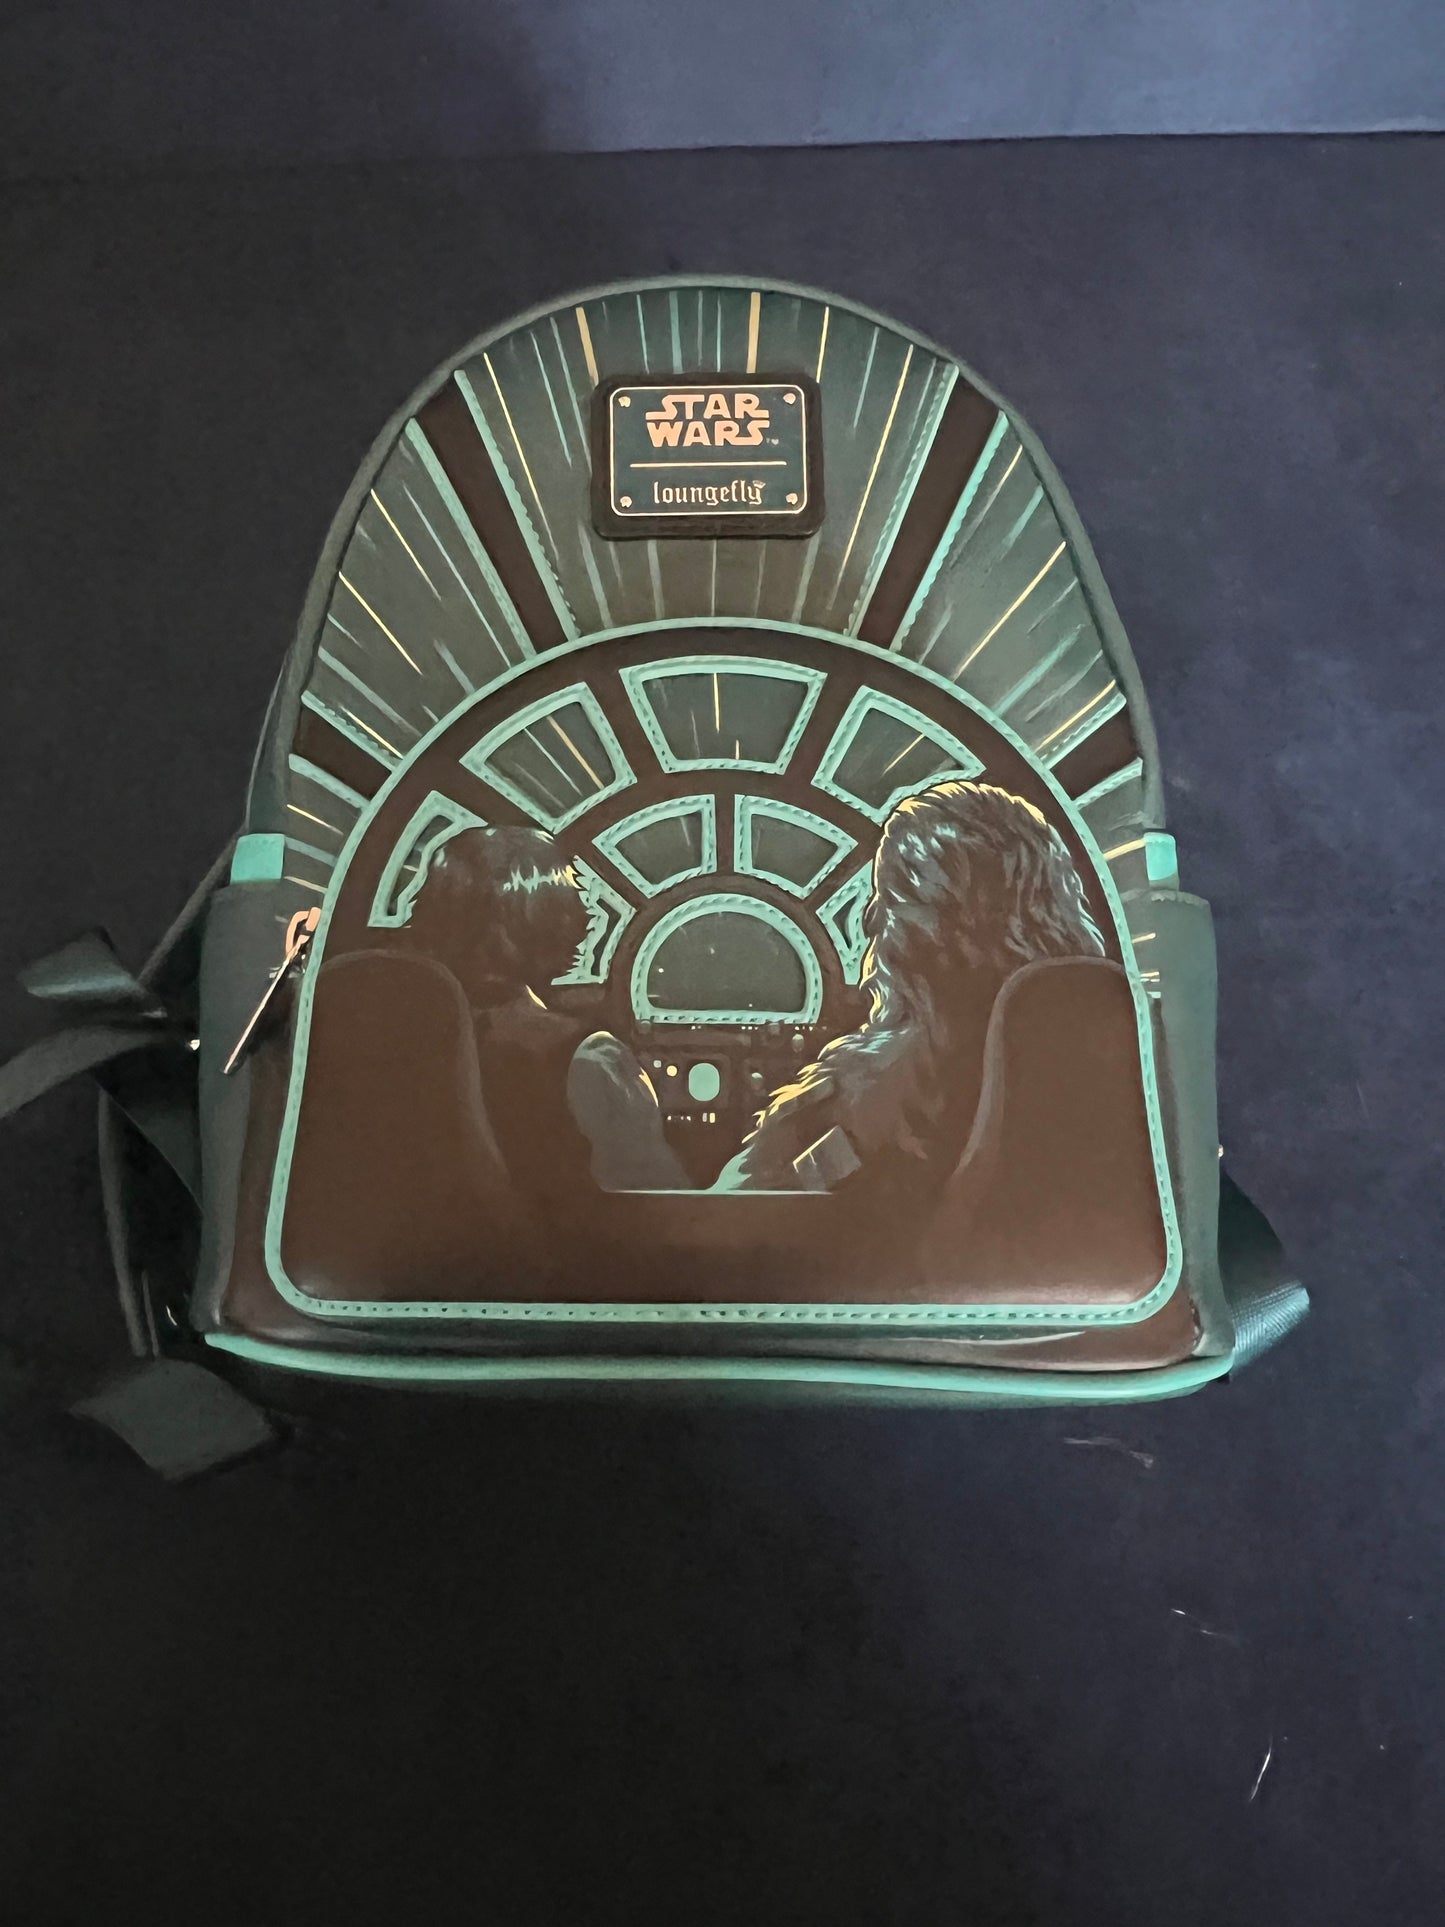 Star Wars Loungefly Backpack - New with Tags